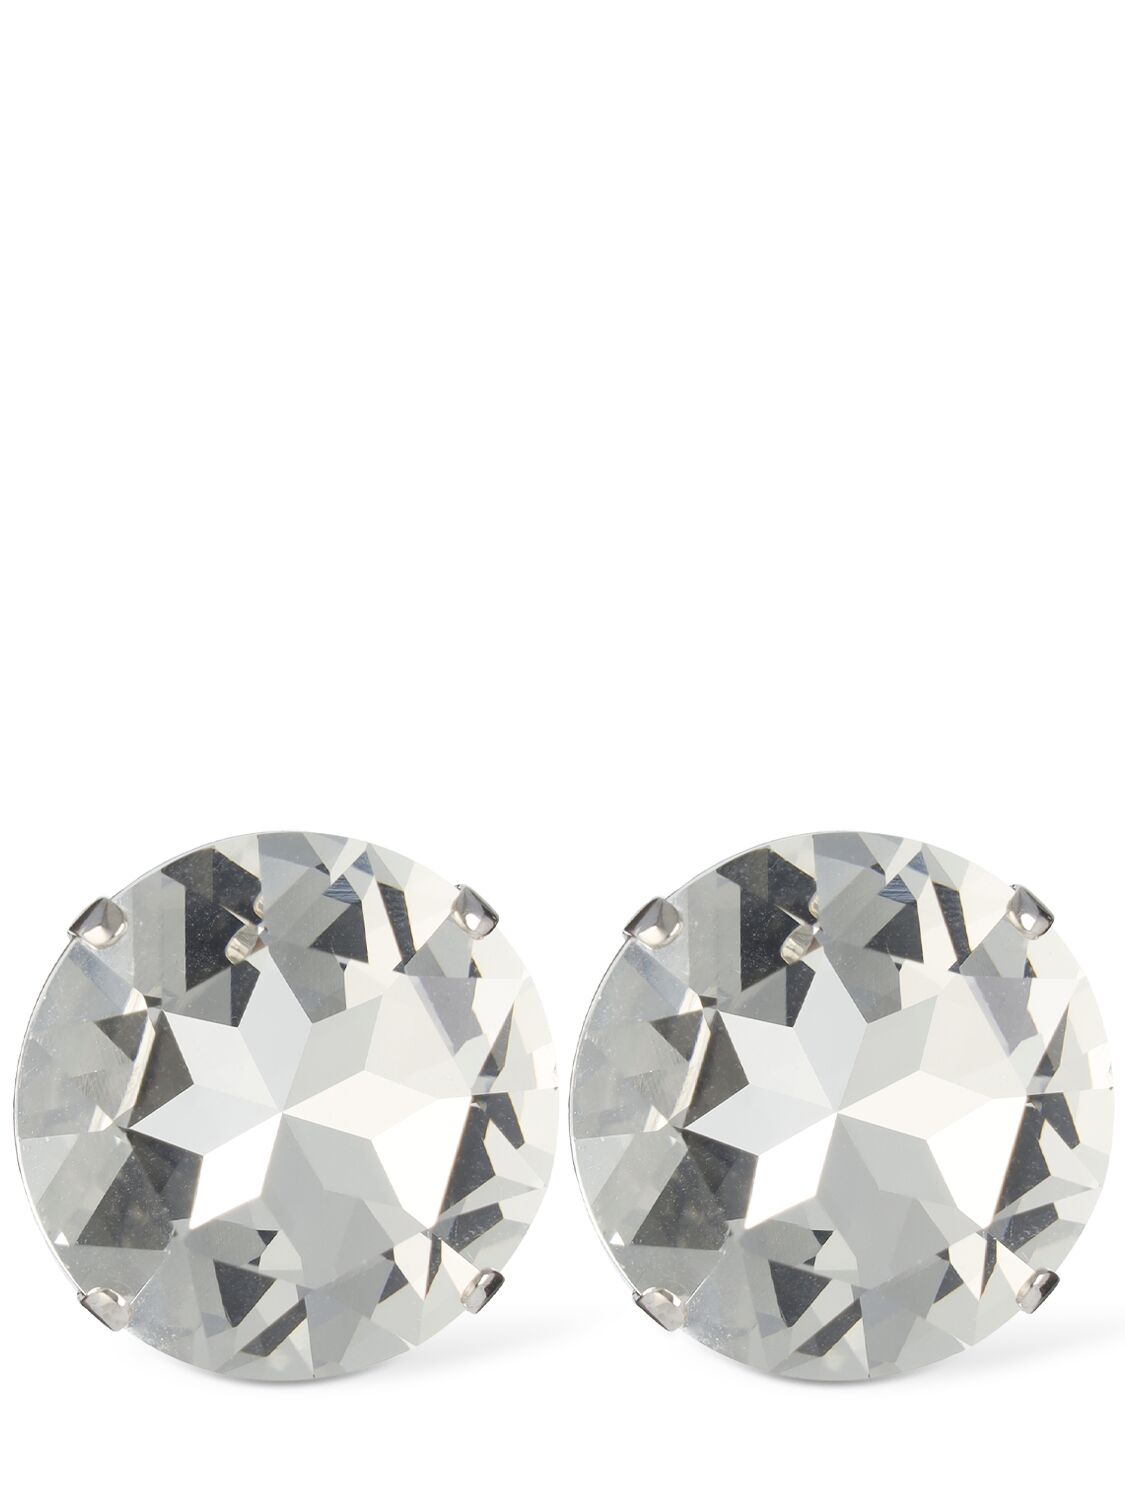 Alessandra Rich Small Round Crystal Earrings In Silver